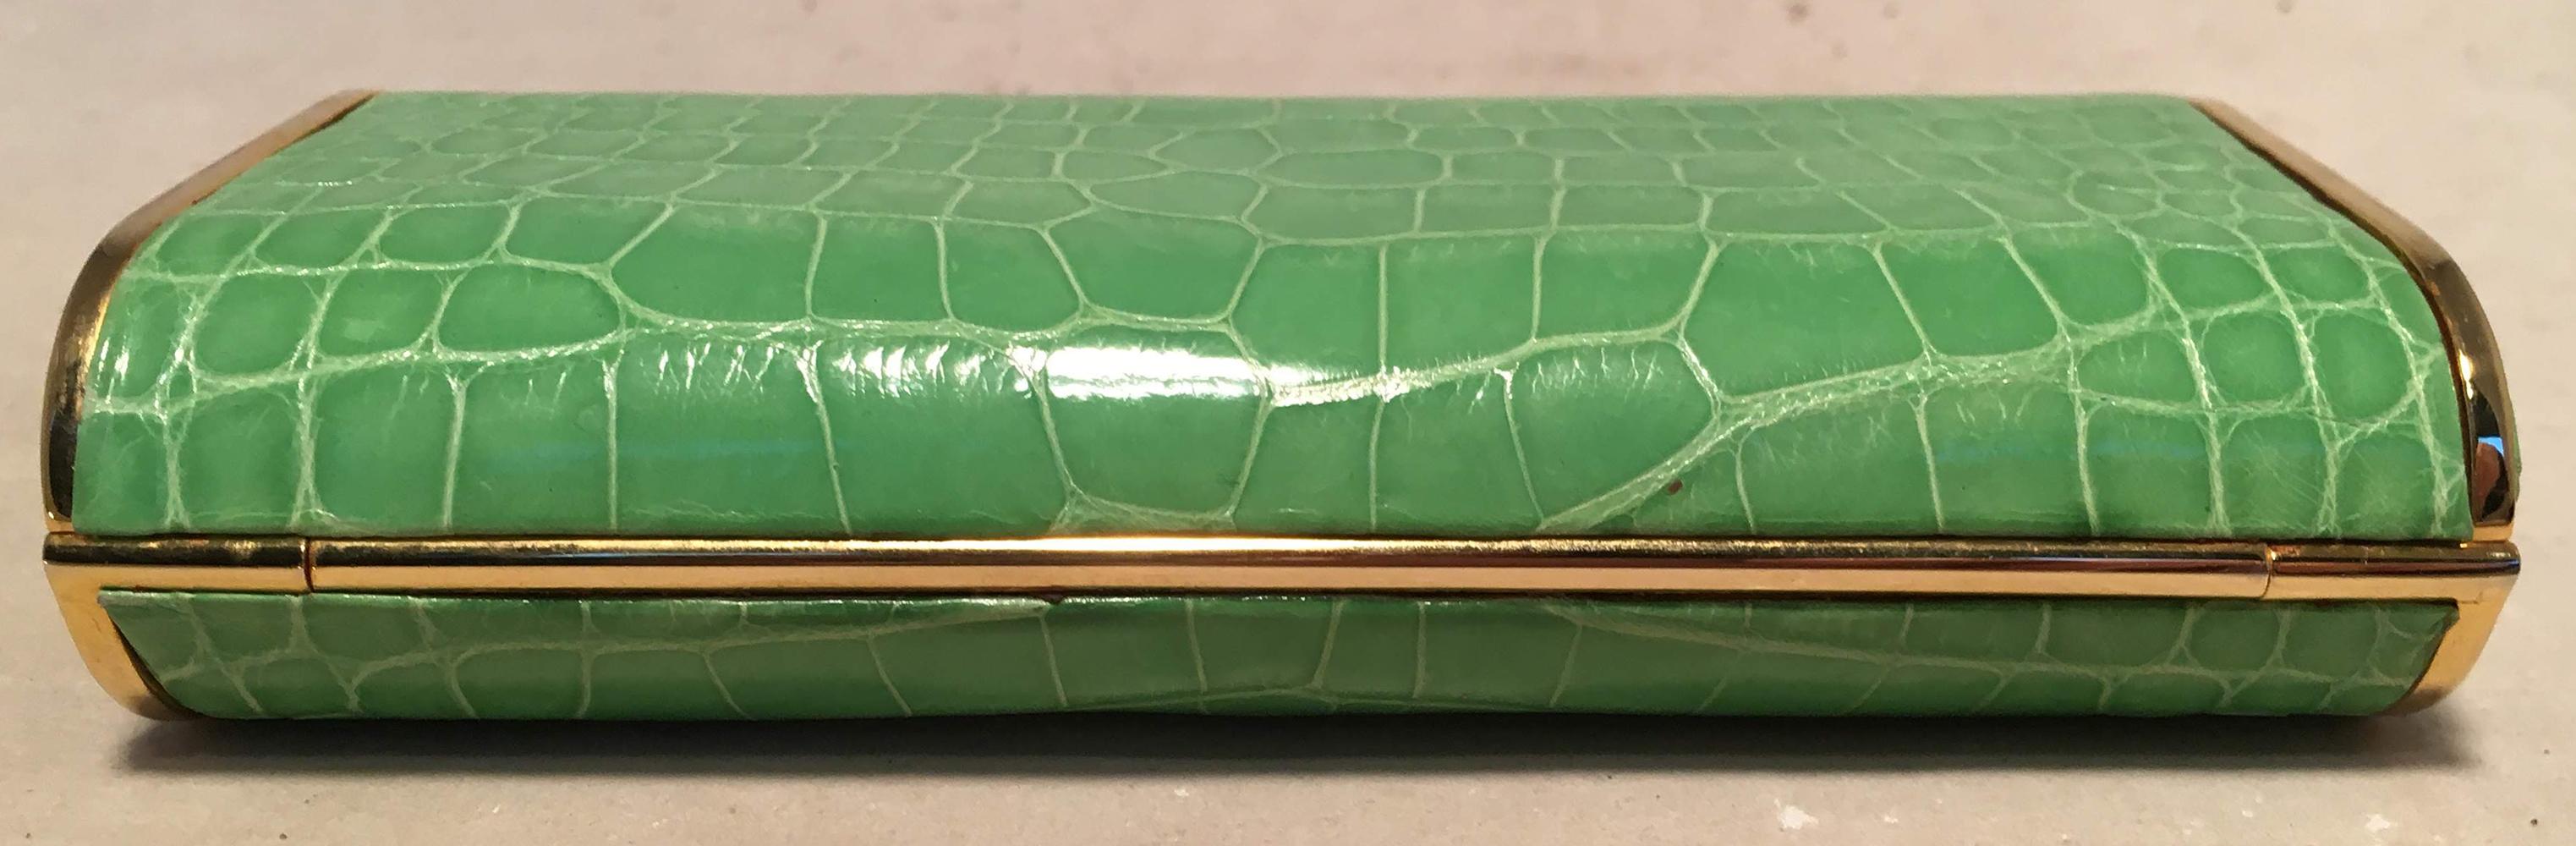 Judith Leiber Vintage Mini Green Alligator Clutch Minaudiere In Excellent Condition For Sale In Philadelphia, PA